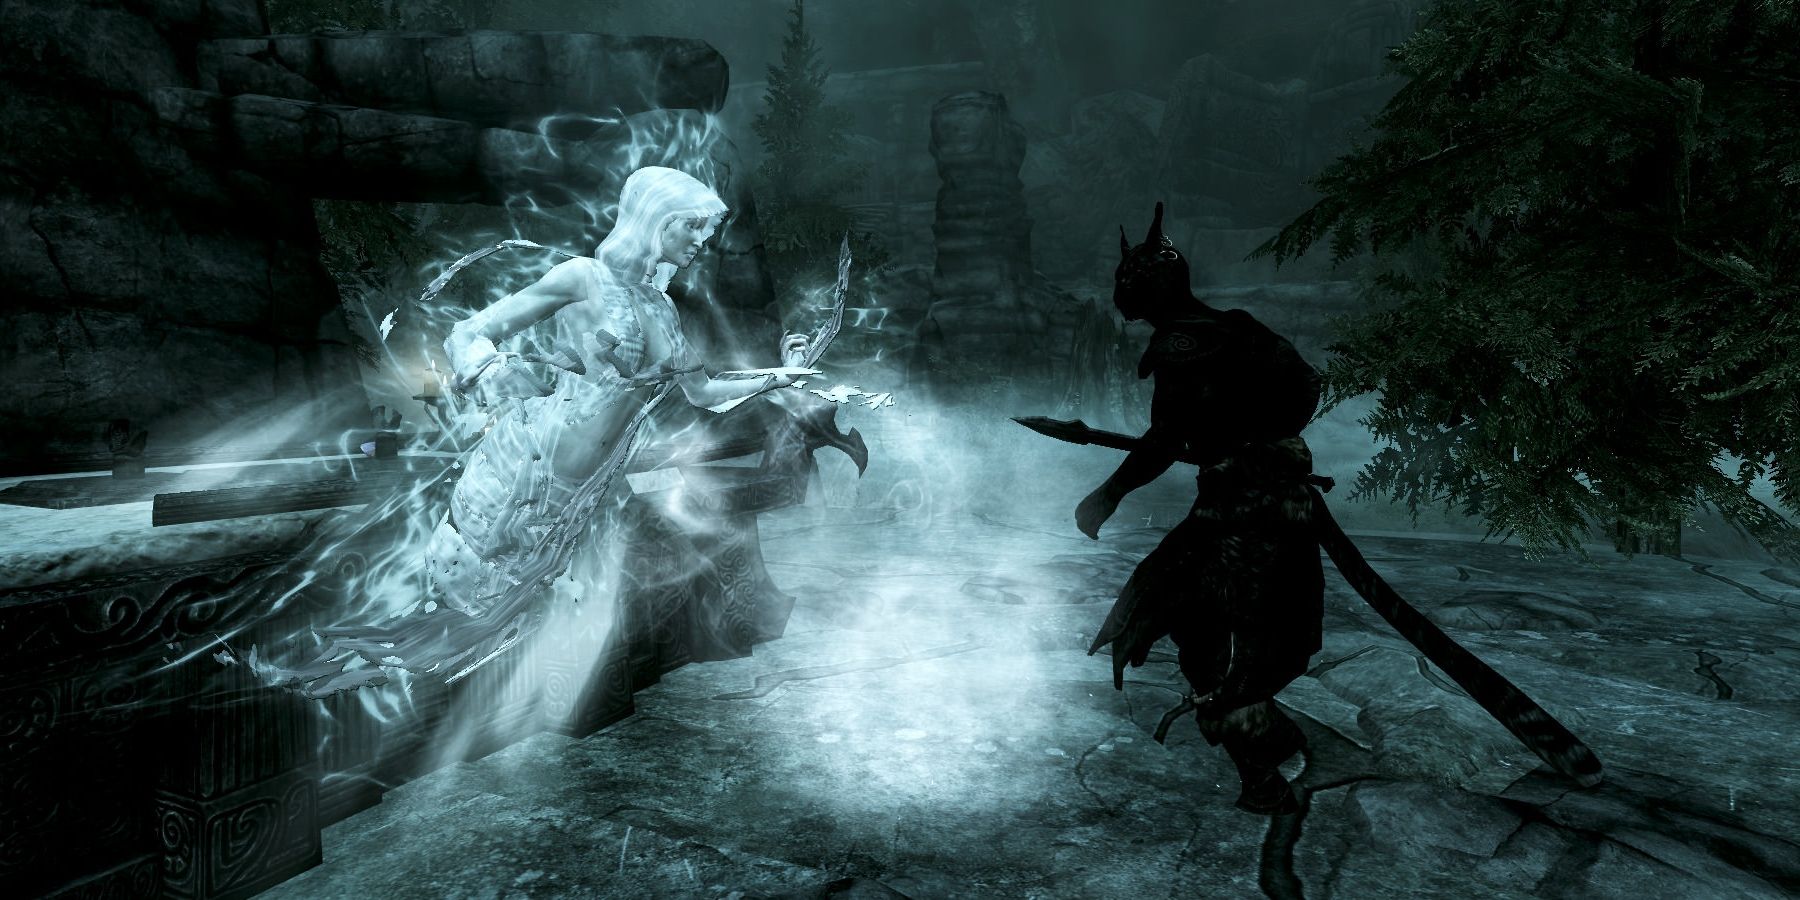 The Dragonborn Fighting The Pale Lady At Night